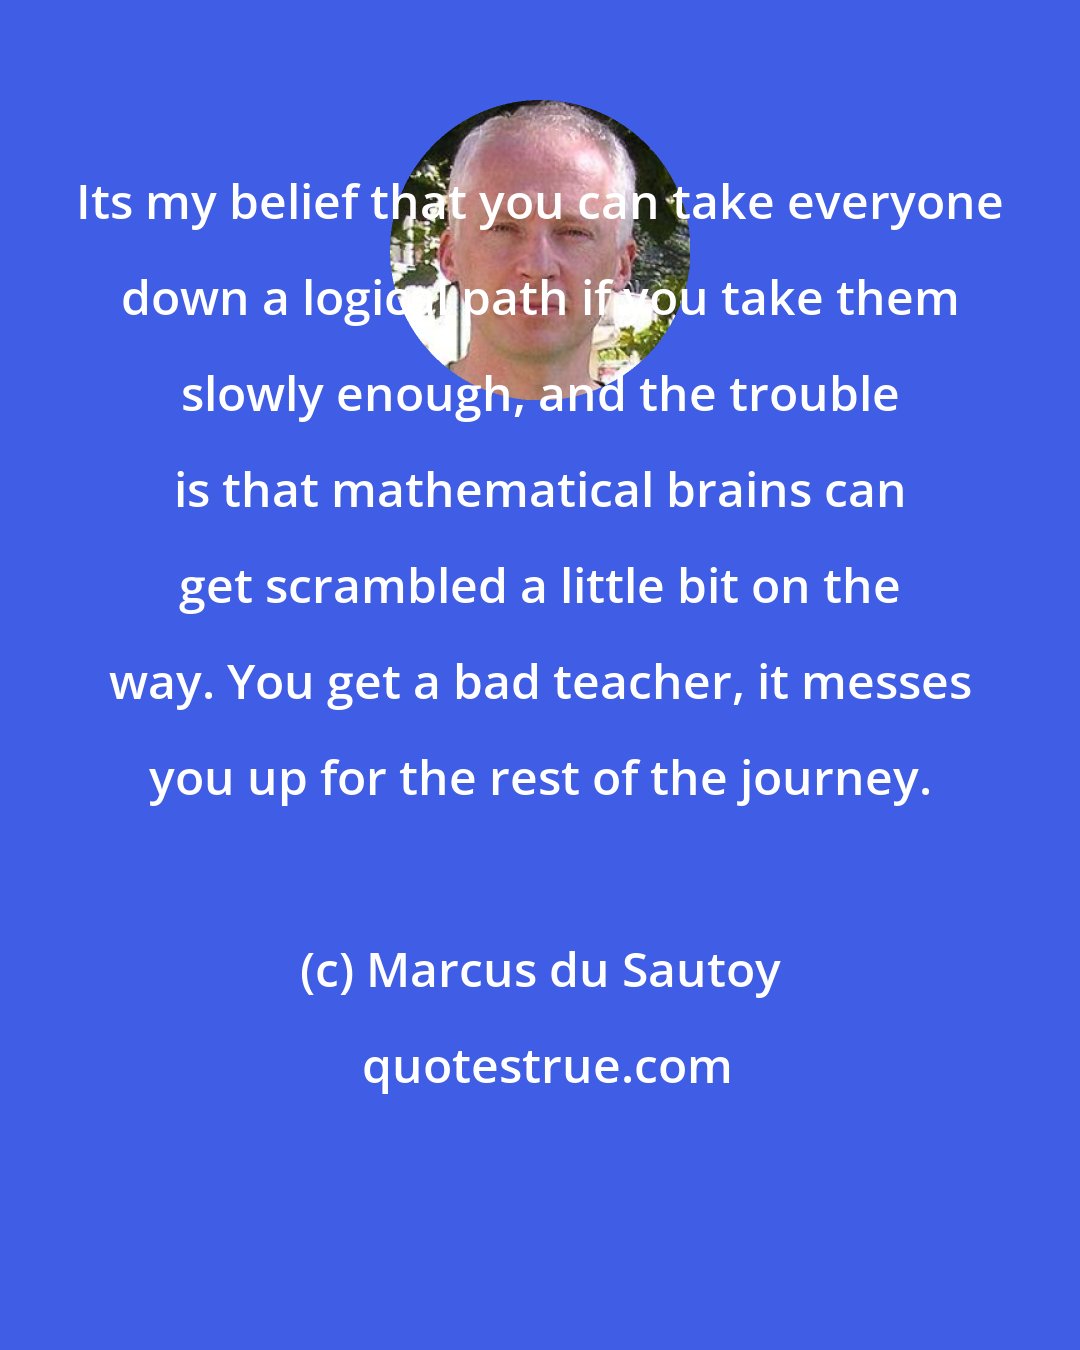 Marcus du Sautoy: Its my belief that you can take everyone down a logical path if you take them slowly enough, and the trouble is that mathematical brains can get scrambled a little bit on the way. You get a bad teacher, it messes you up for the rest of the journey.